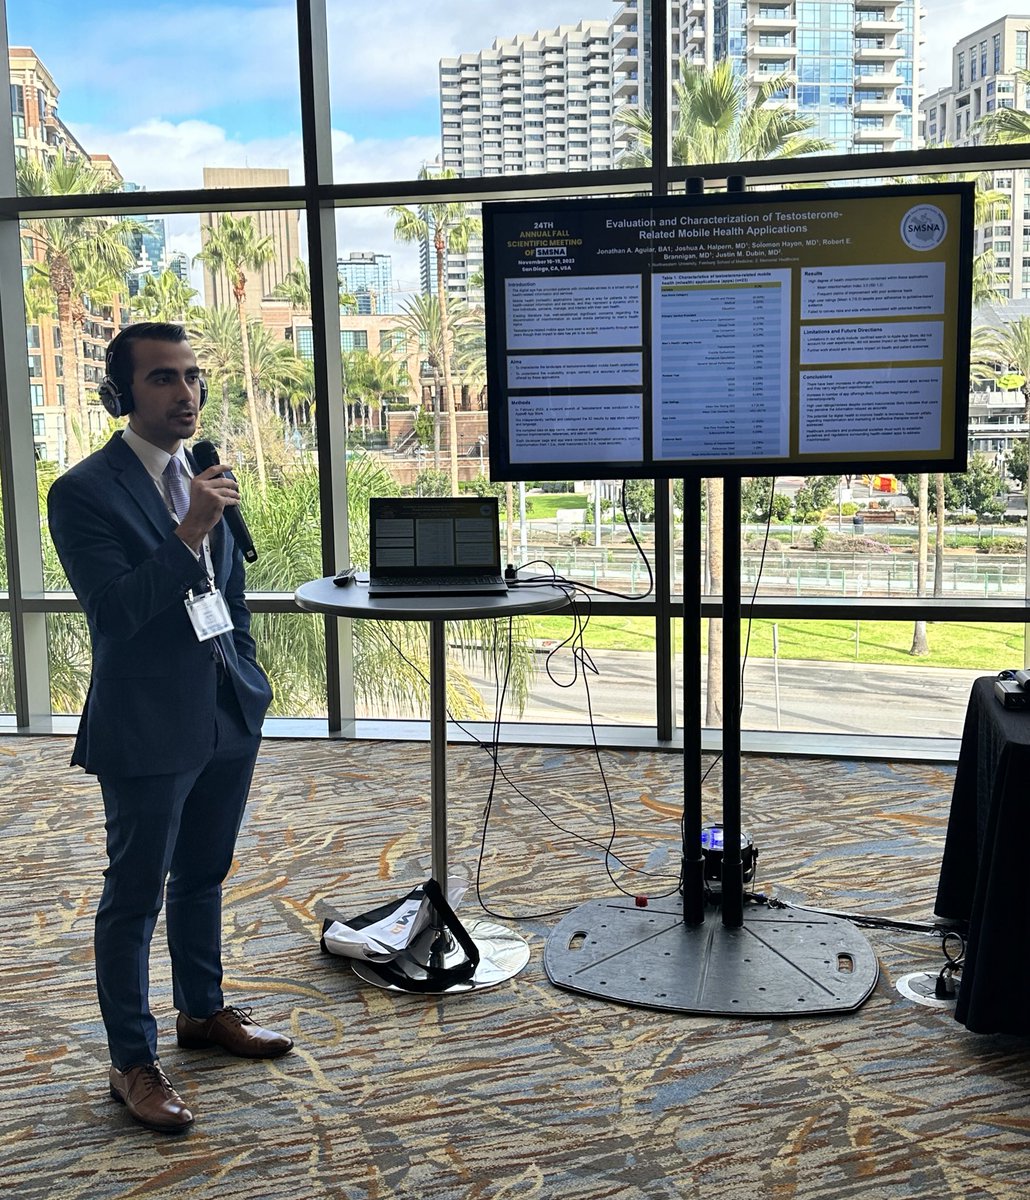 Fantastic presentation by Northwestern med student @JAguiar26 on the rising popularity of testosterone apps Unfortunately, the apps are not providing accurate information, so users beware! #smsna23